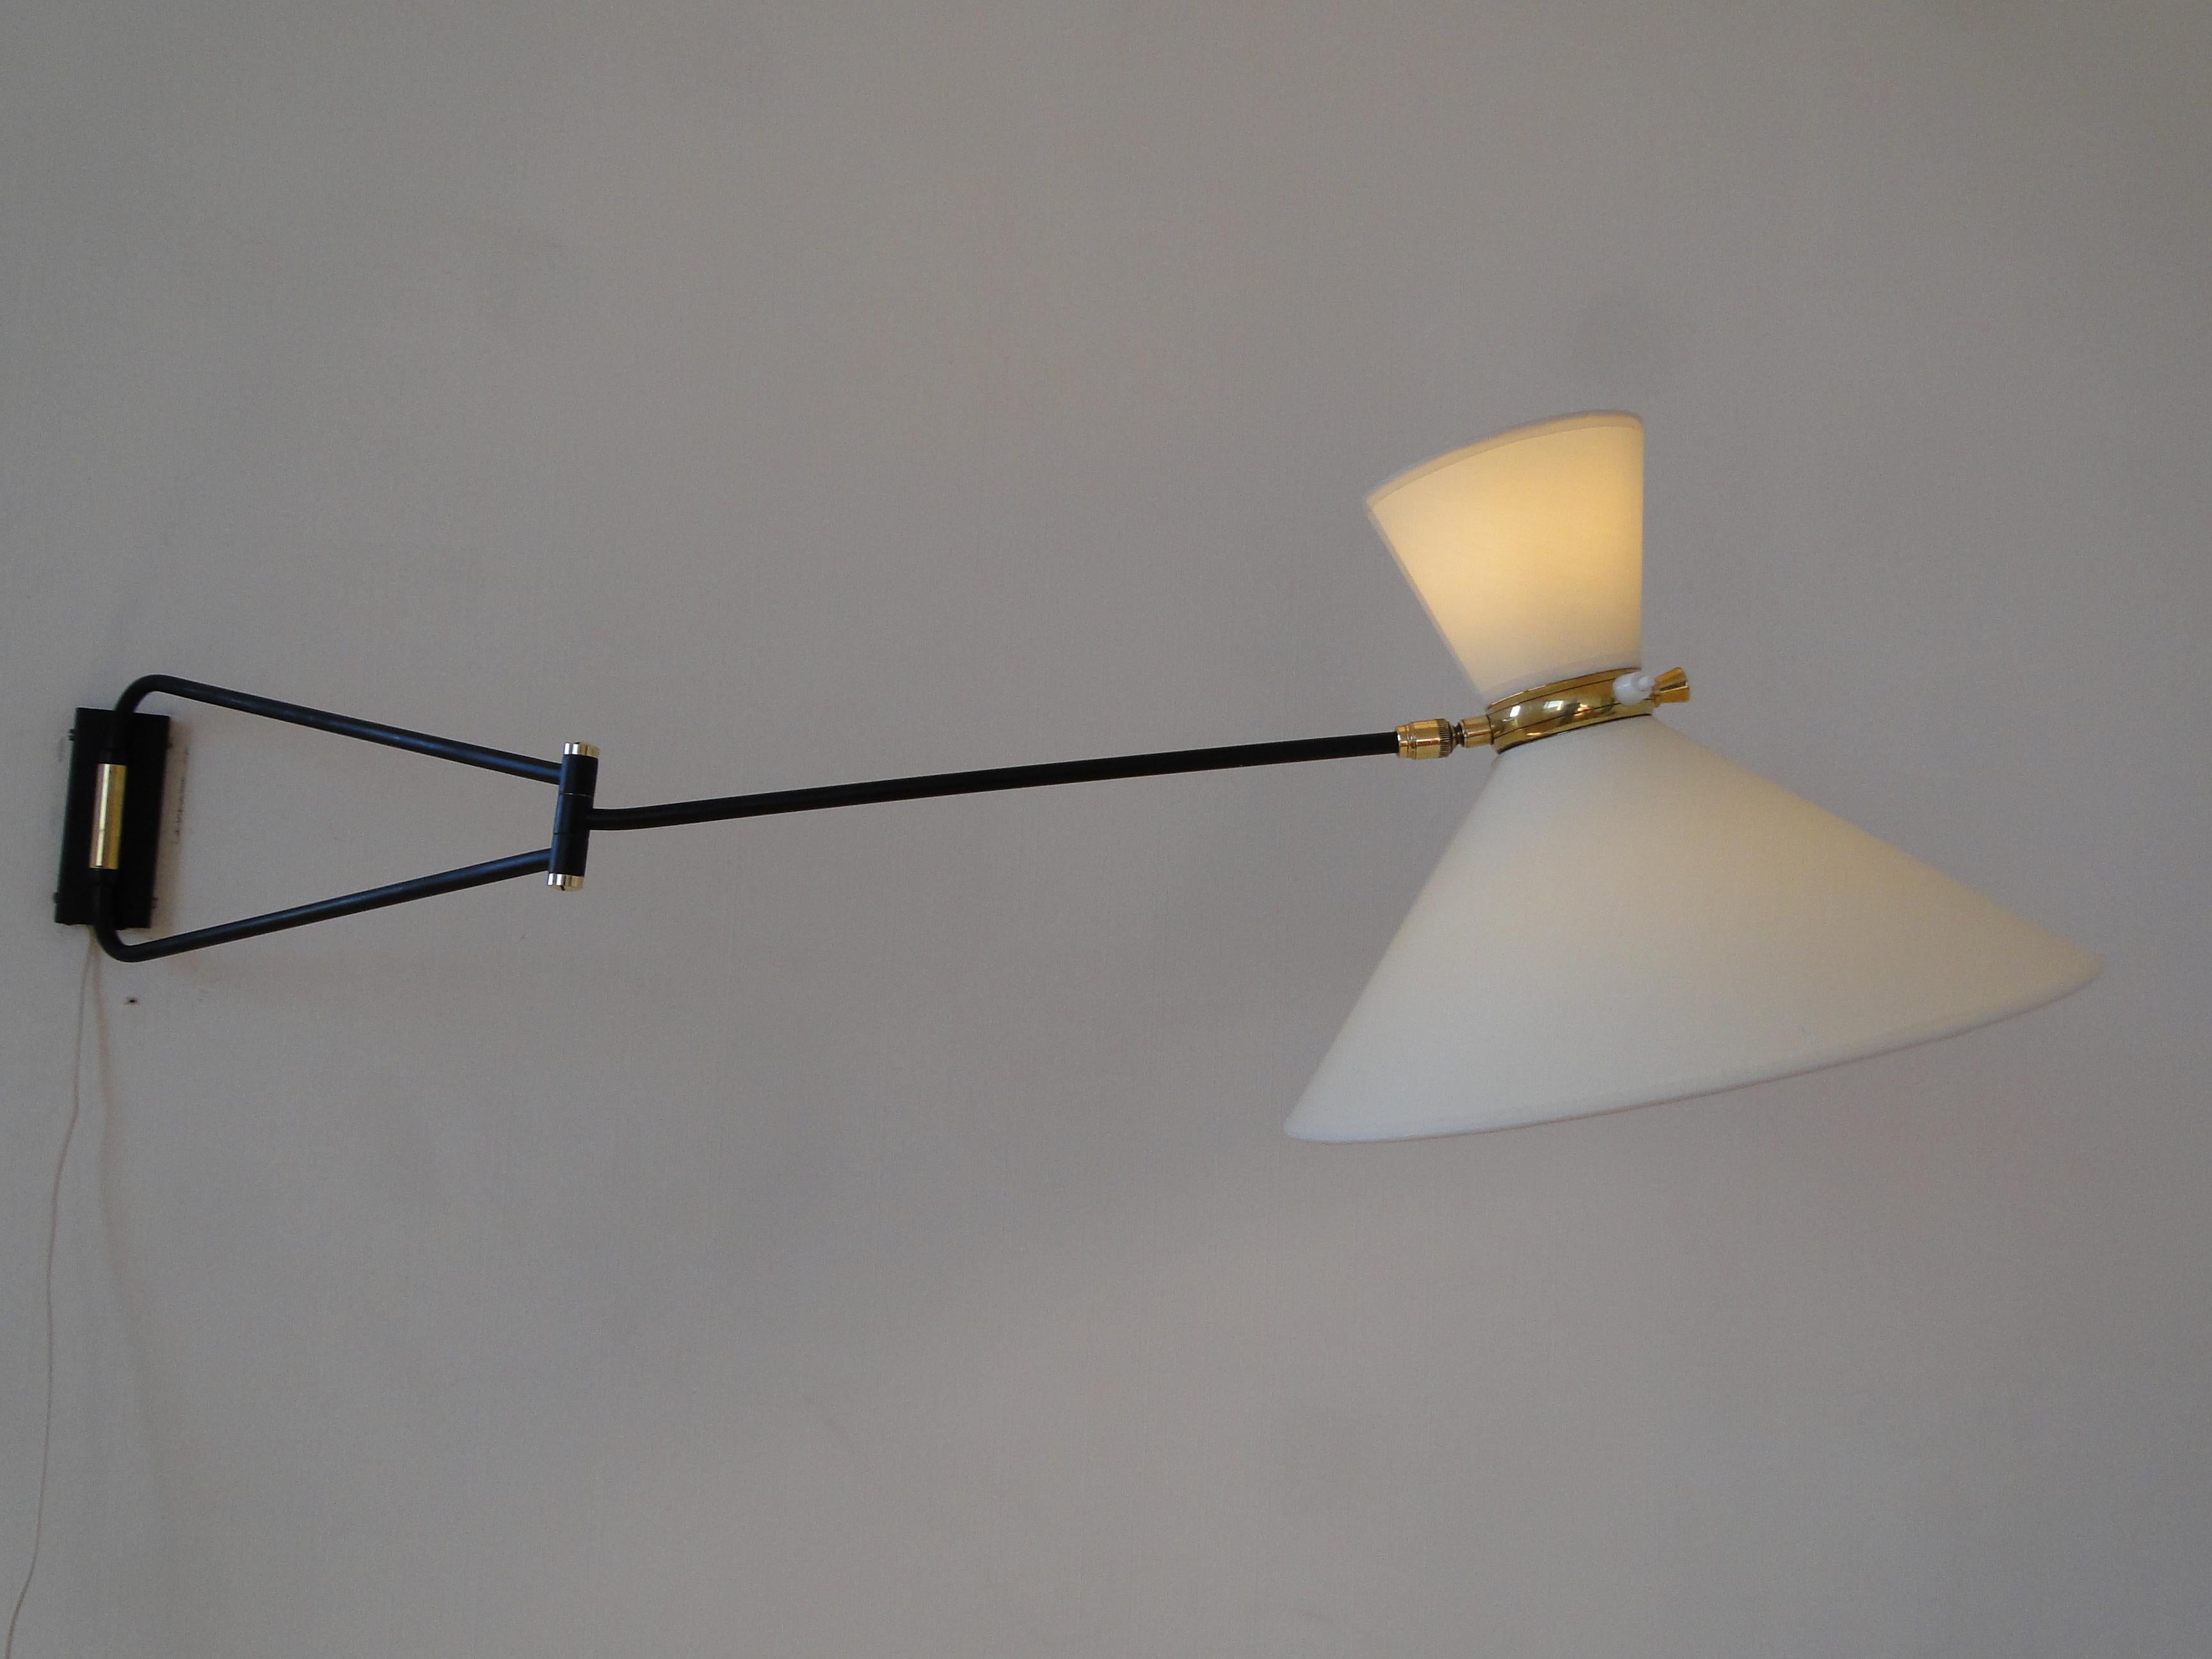 Vintage very large wall lamp by René Mathieu 1950, France.

Wall light by René Mathieu from the 1950s.

2-Arm articulated metal stem.

The double bulb sconce has independent switches for the up and down lights.

New diabolo lampshade.

36